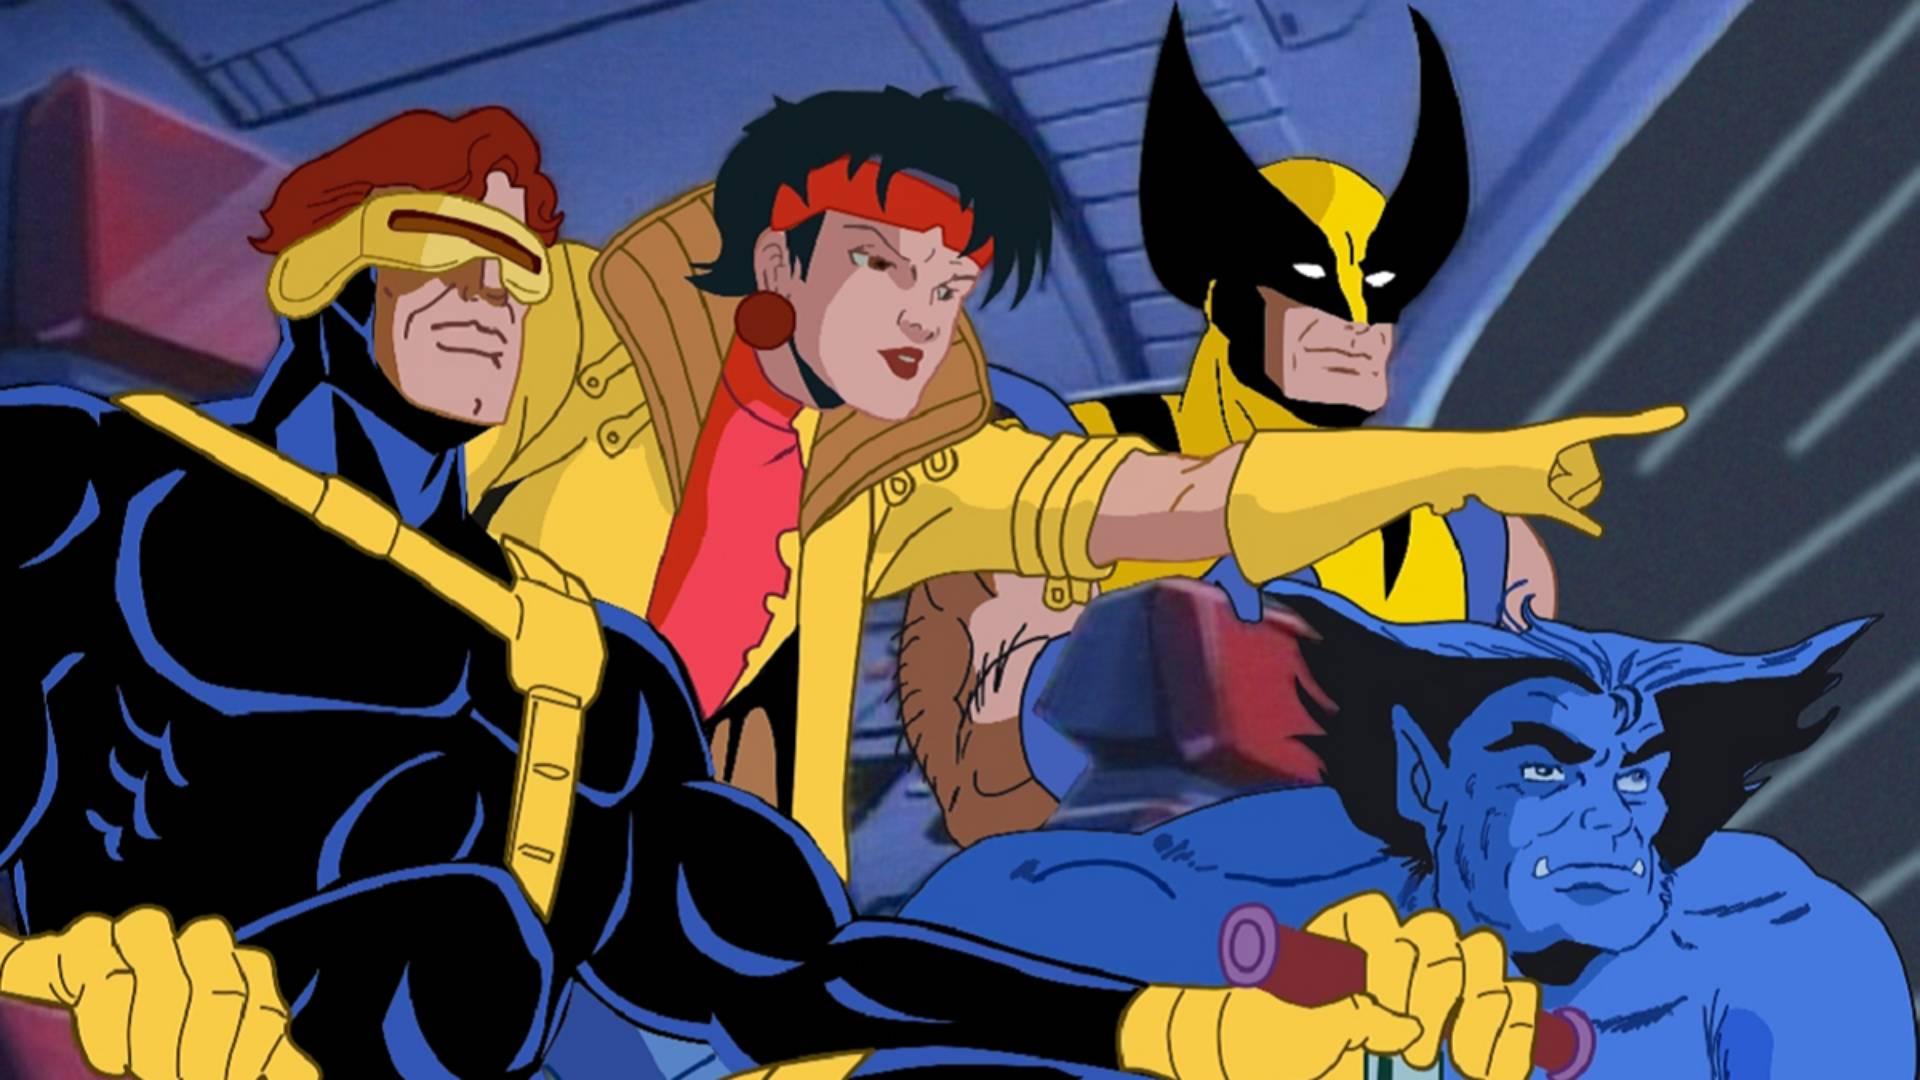 X Men 97 Episode 10: Release Date, Expected Plot, where to watch?